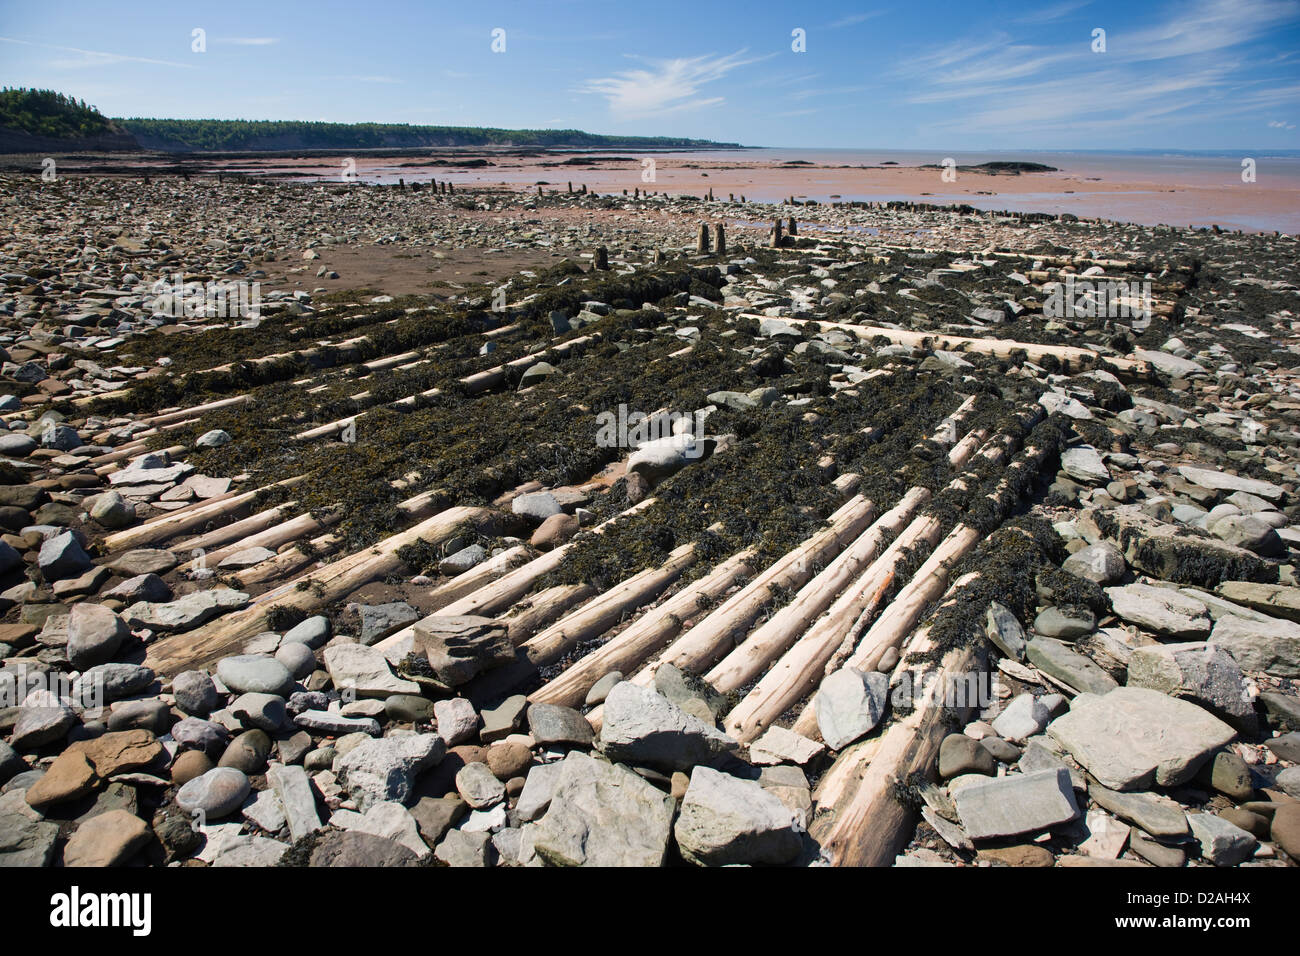 Remains of wooden piers and jetties from the coal mining industry on the beach at the Joggins fossil cliffs Stock Photo